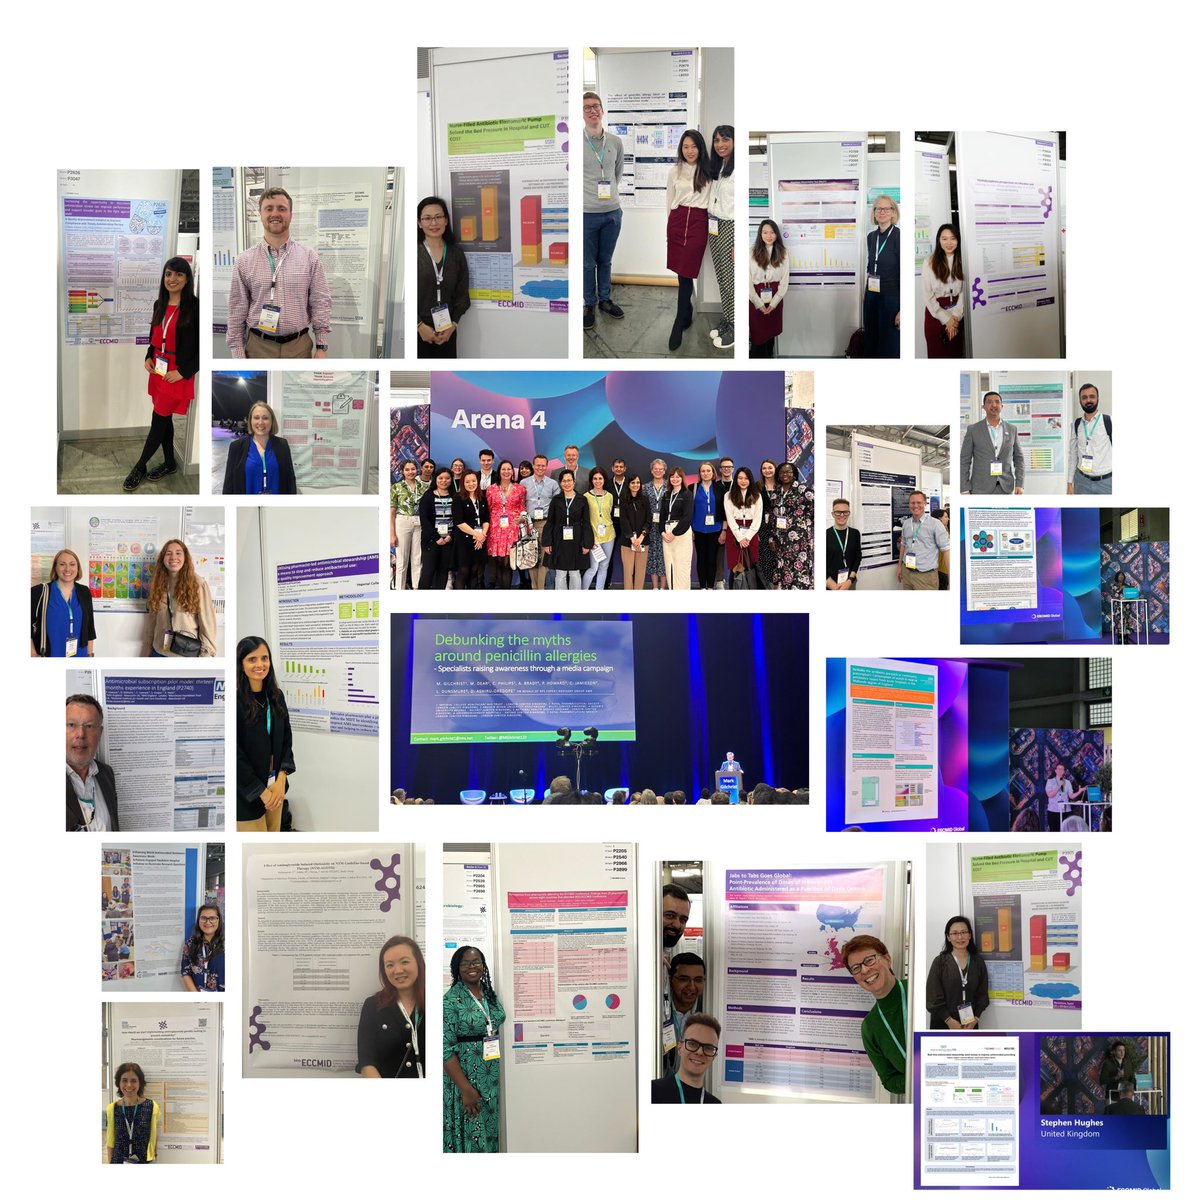 Joining @SIDPharm to celebrate #IDPharmacistsDay. Inspired by the ID pharmacists I am connected with globally. #SIDPAdvocacy #JointheAMRFight #IDTwitter Ps - a few ID physicians in the photos too.